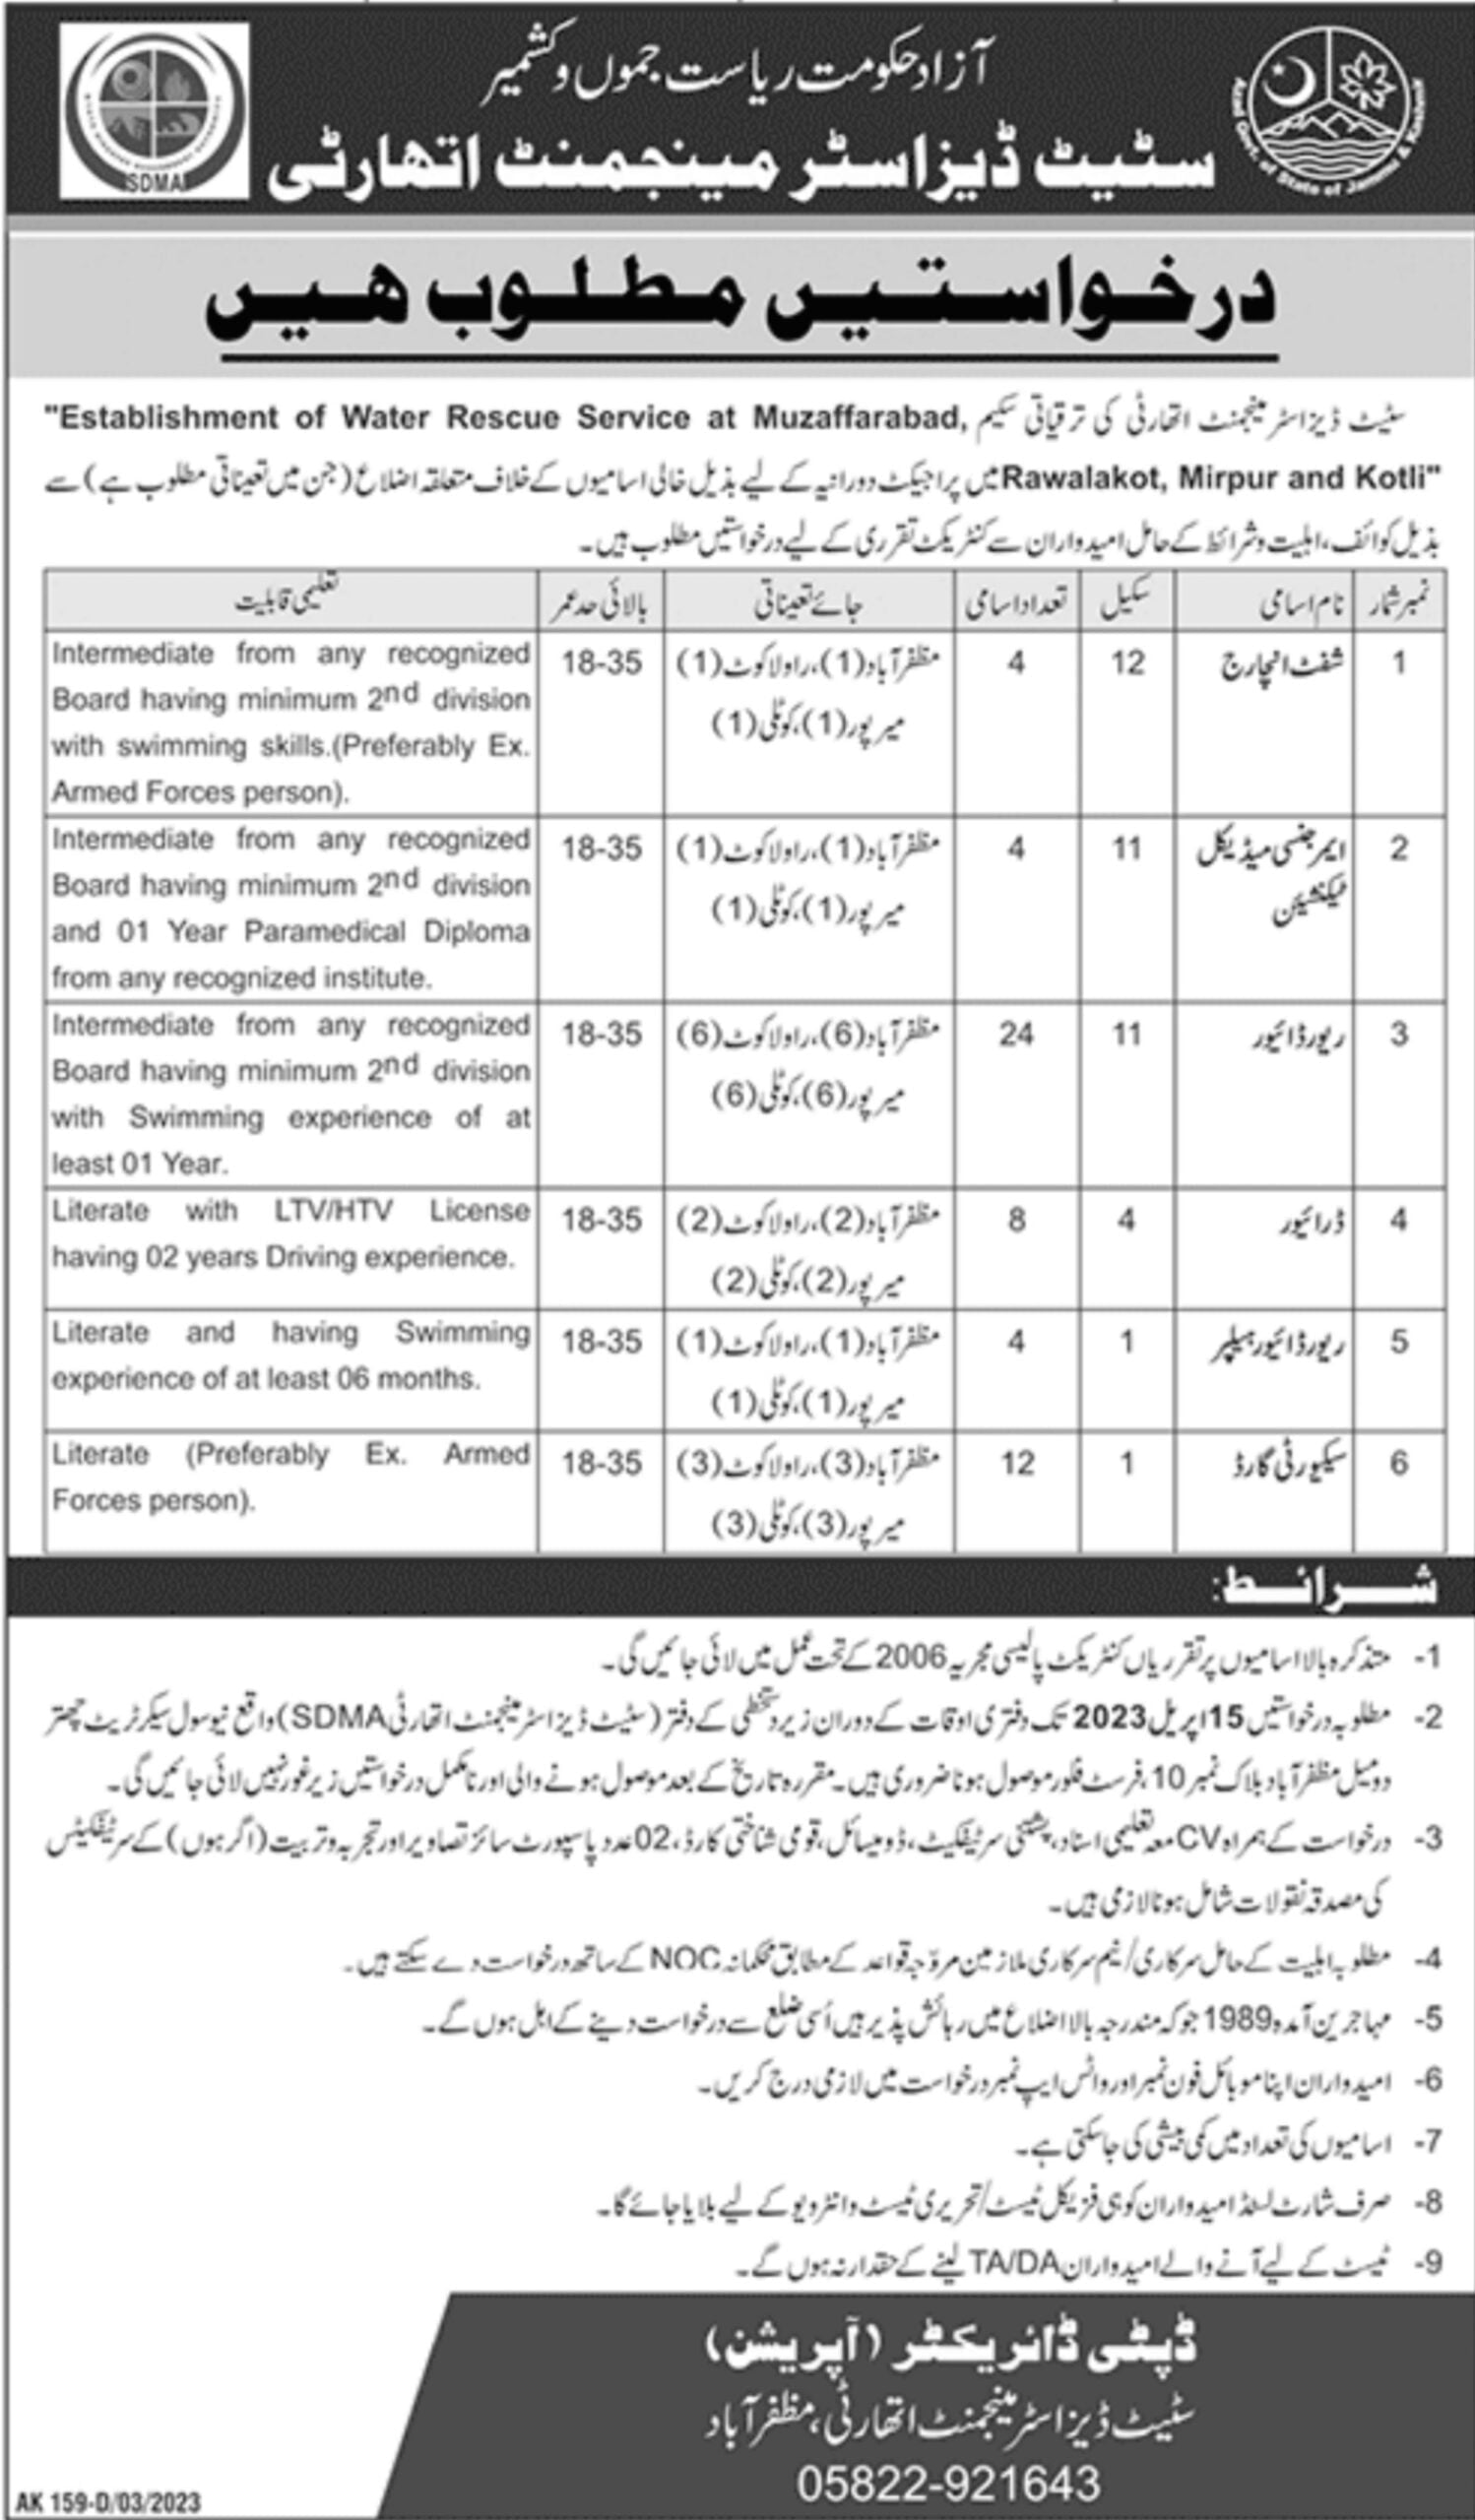 Latest jobs in State Disaster Management Authority Azad Kashmir 2023